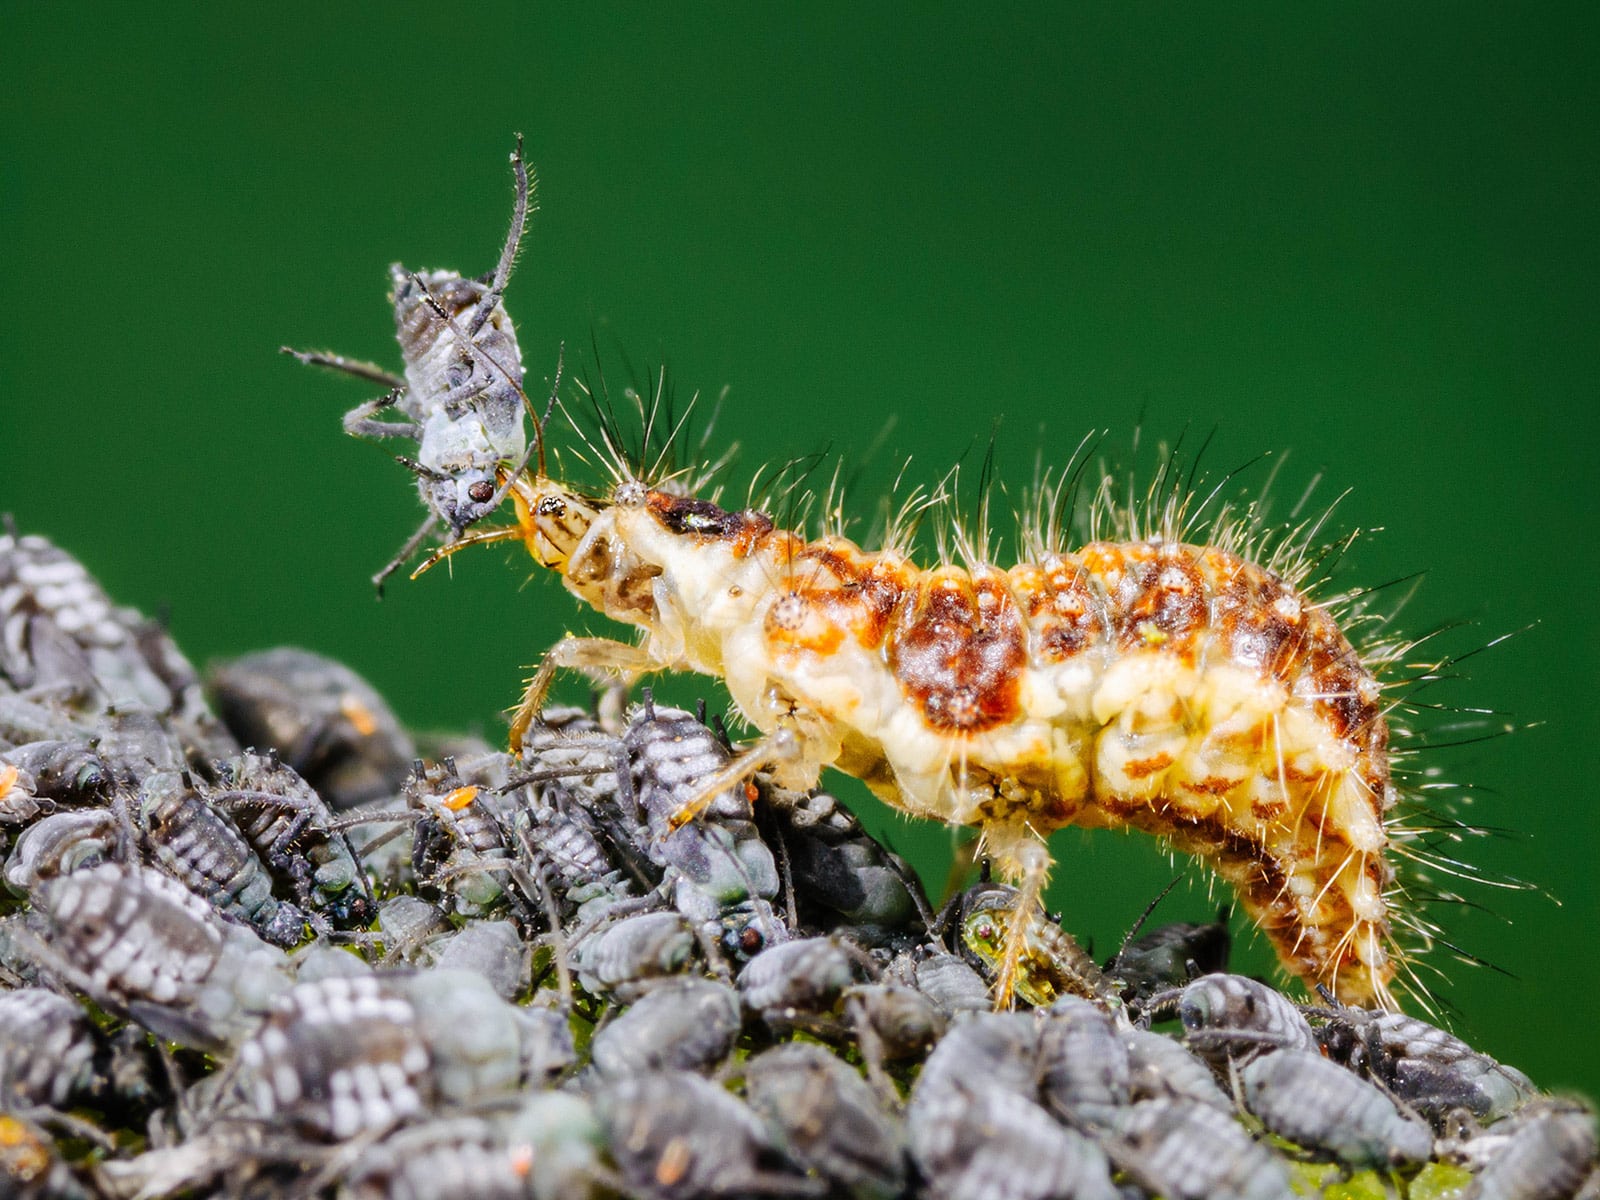 An aggressive lacewing larva attacking a gray aphid while crawling over a pile of other aphids